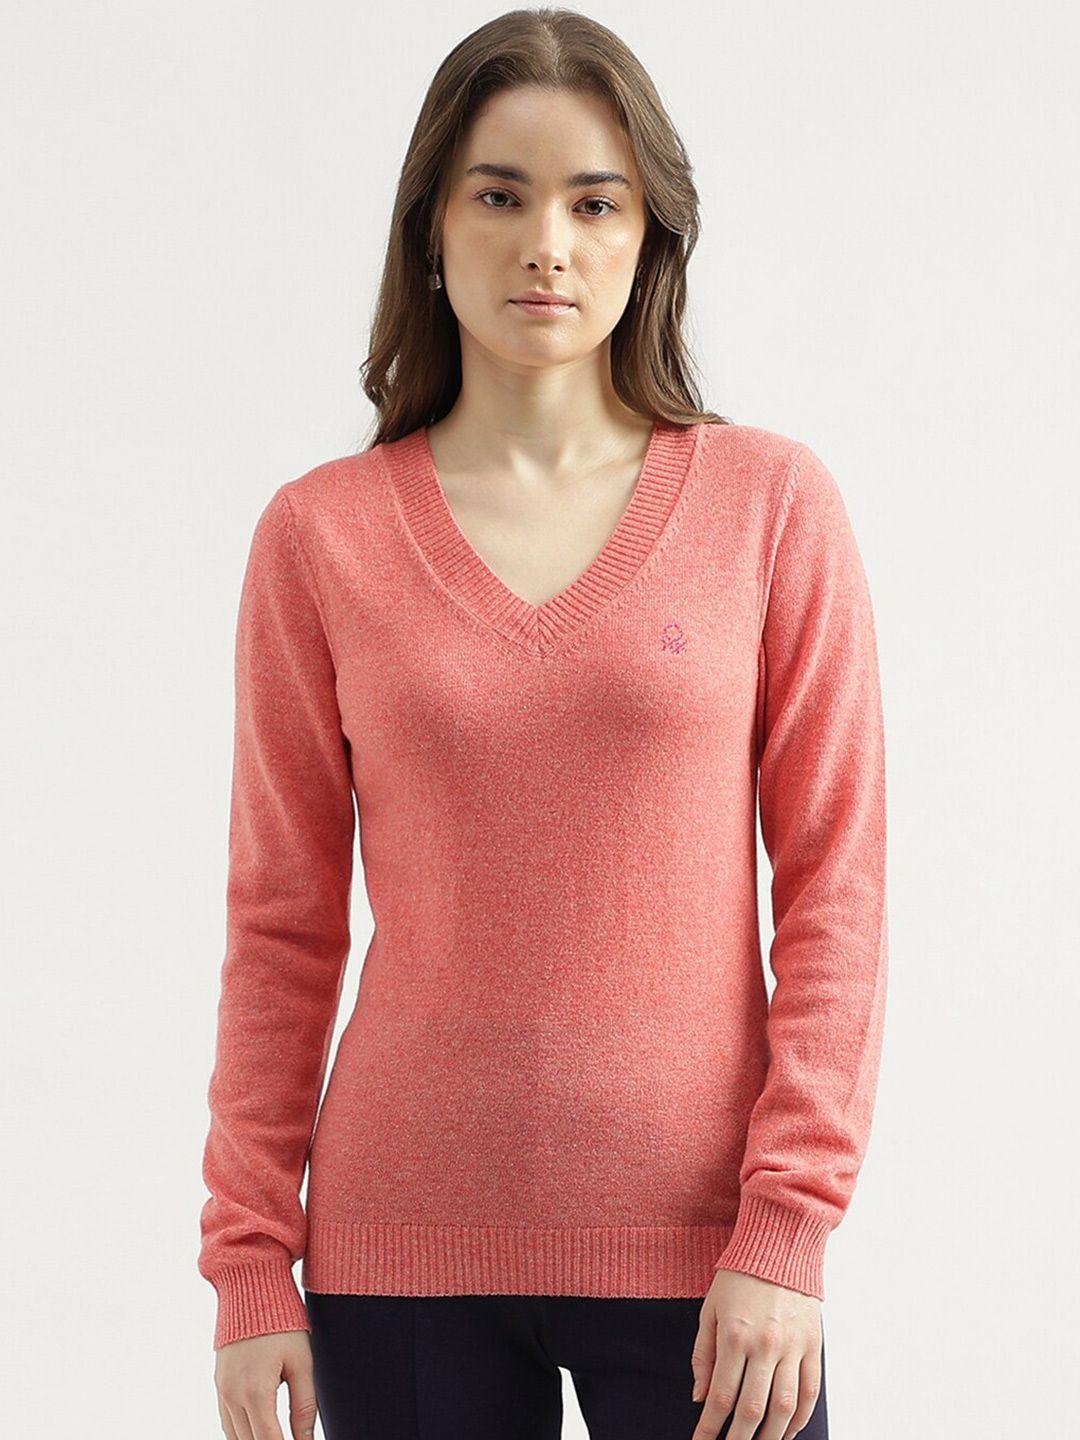 united-colors-of-benetton-v-neck-woollen-pullover